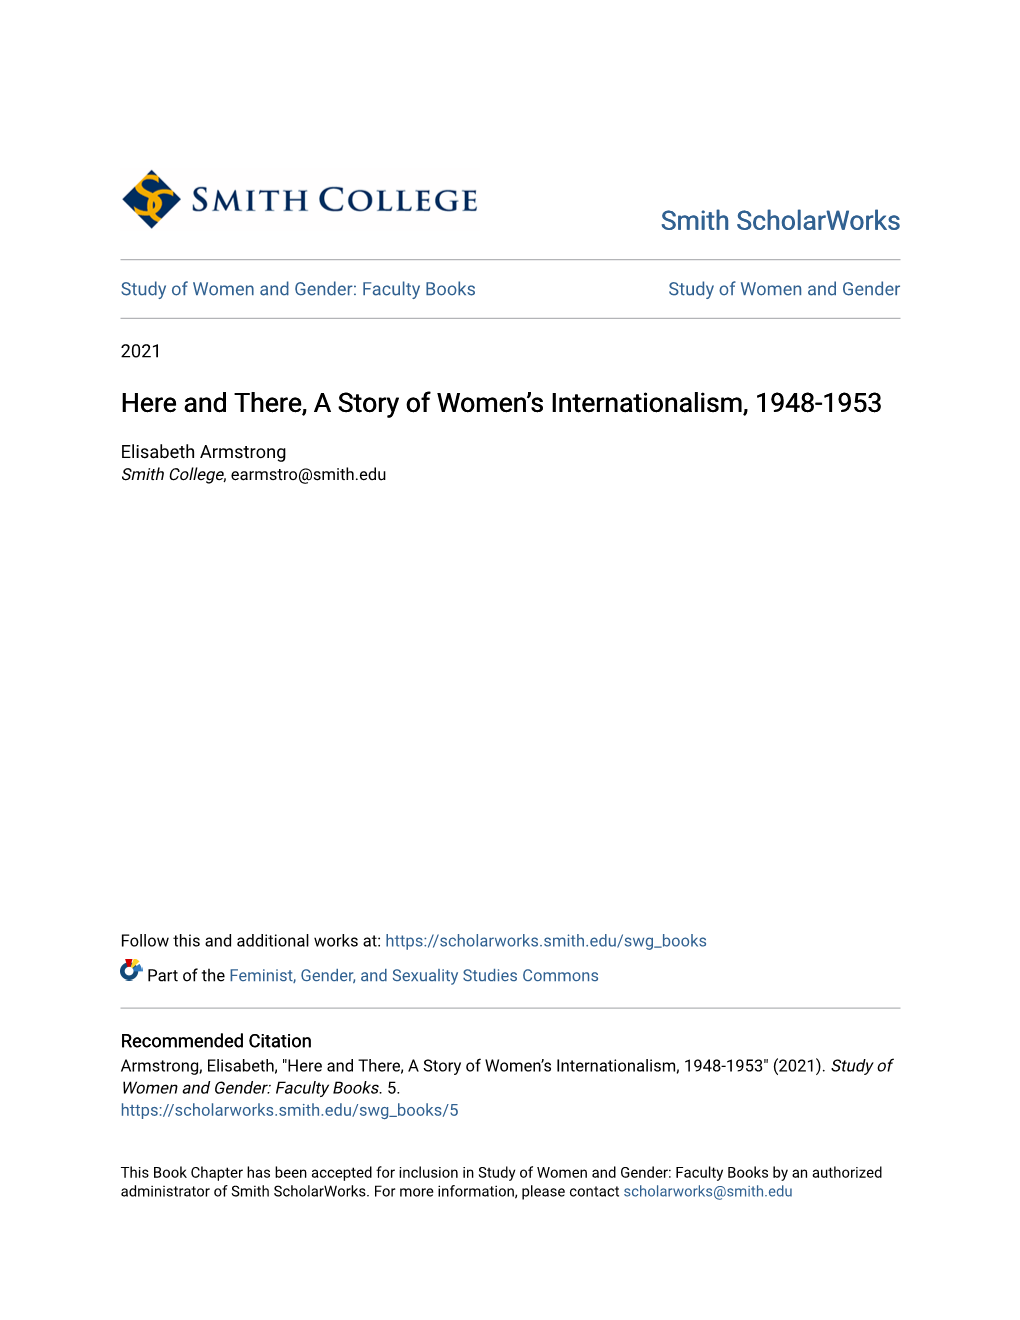 Here and There, a Story of Womenâ•Žs Internationalism, 1948-1953